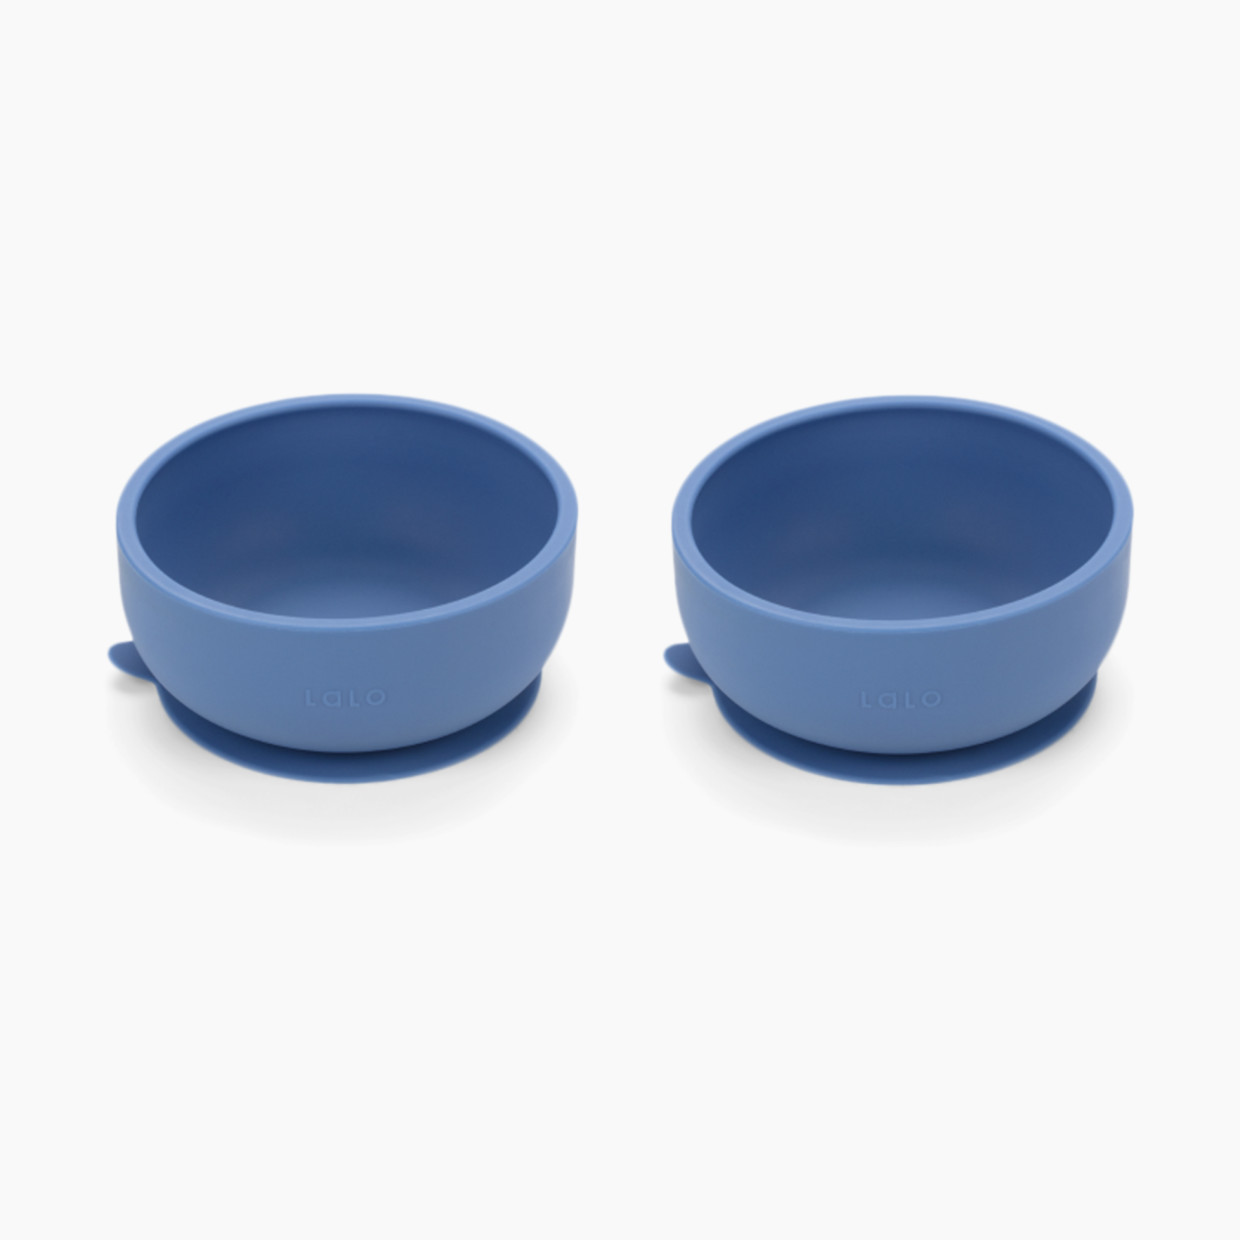 Lalo Suction Bowl - Blueberry, 2.